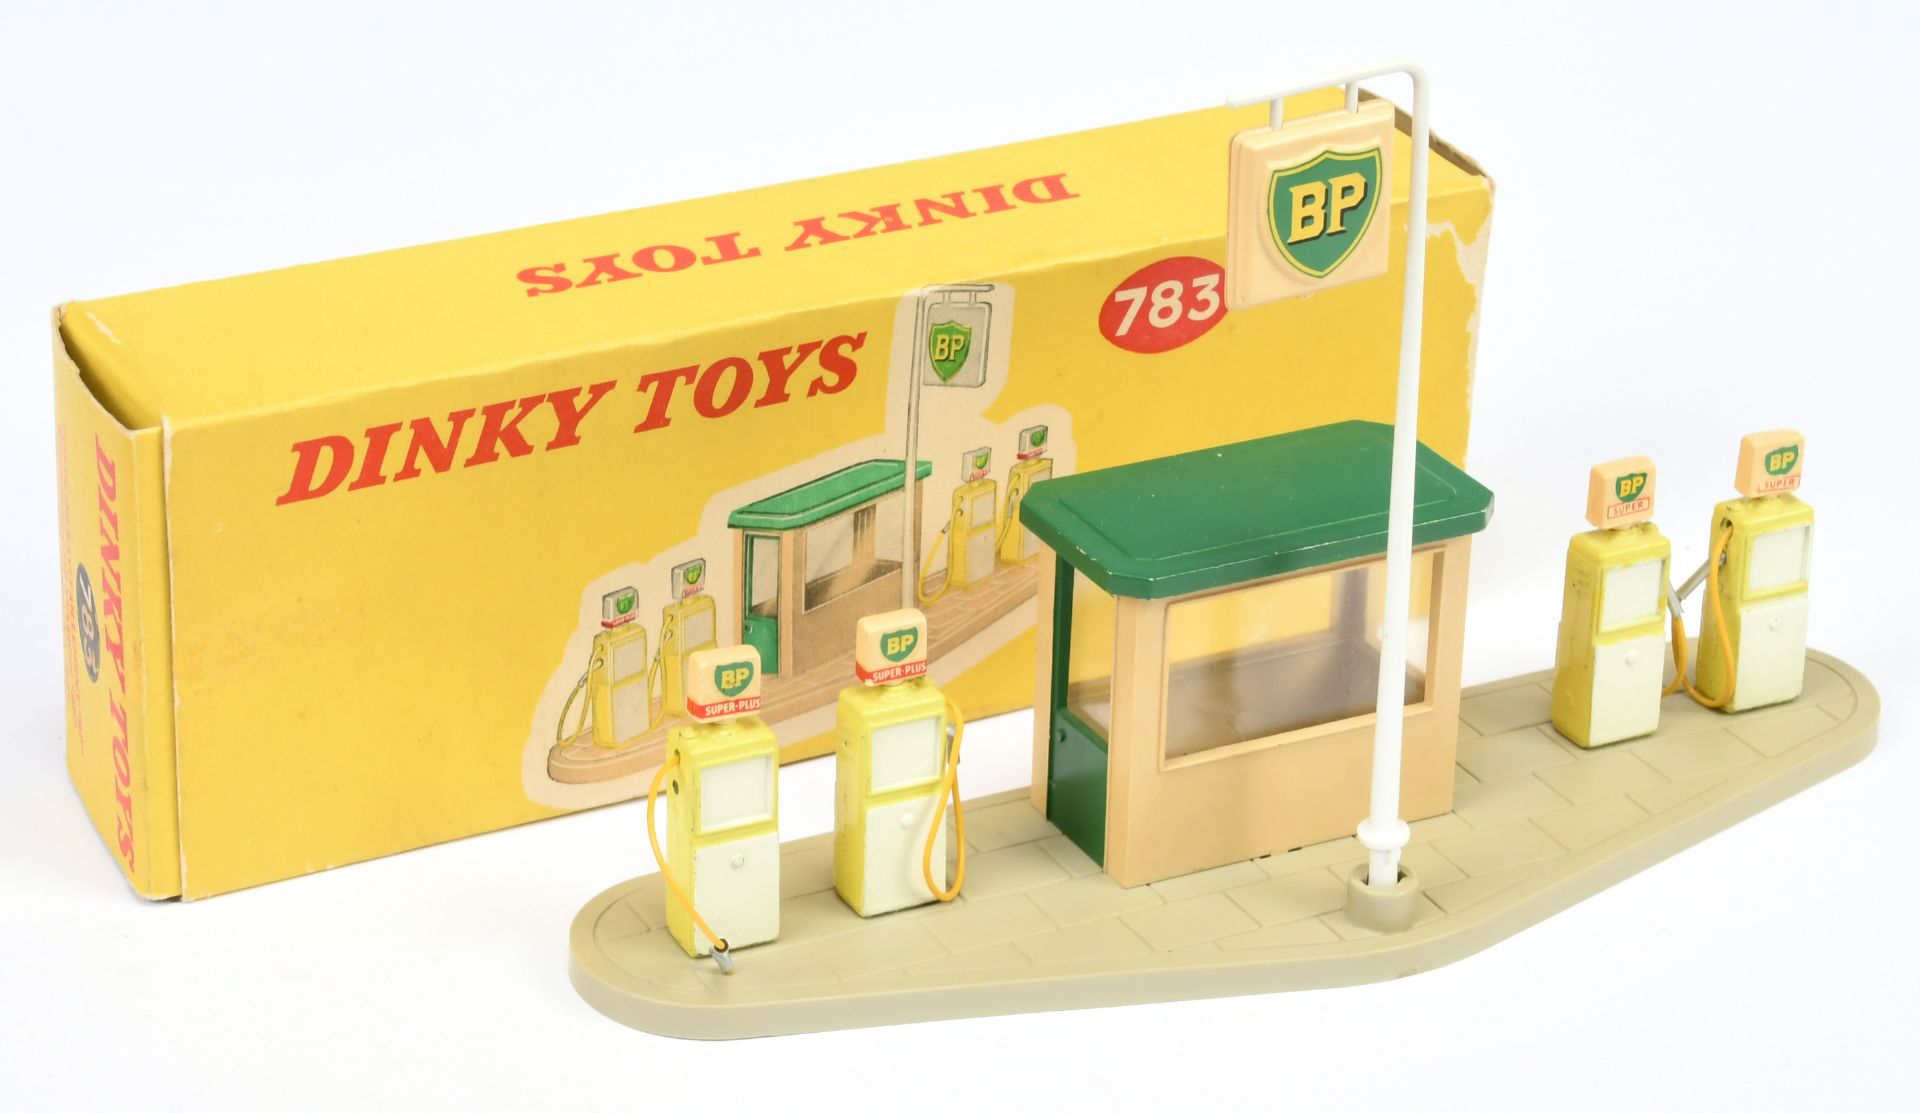 Dinky Toys 783 "BP" Petrol Pump Forecourt Set -Plastic base, hut and sign with 4 X metal pumps